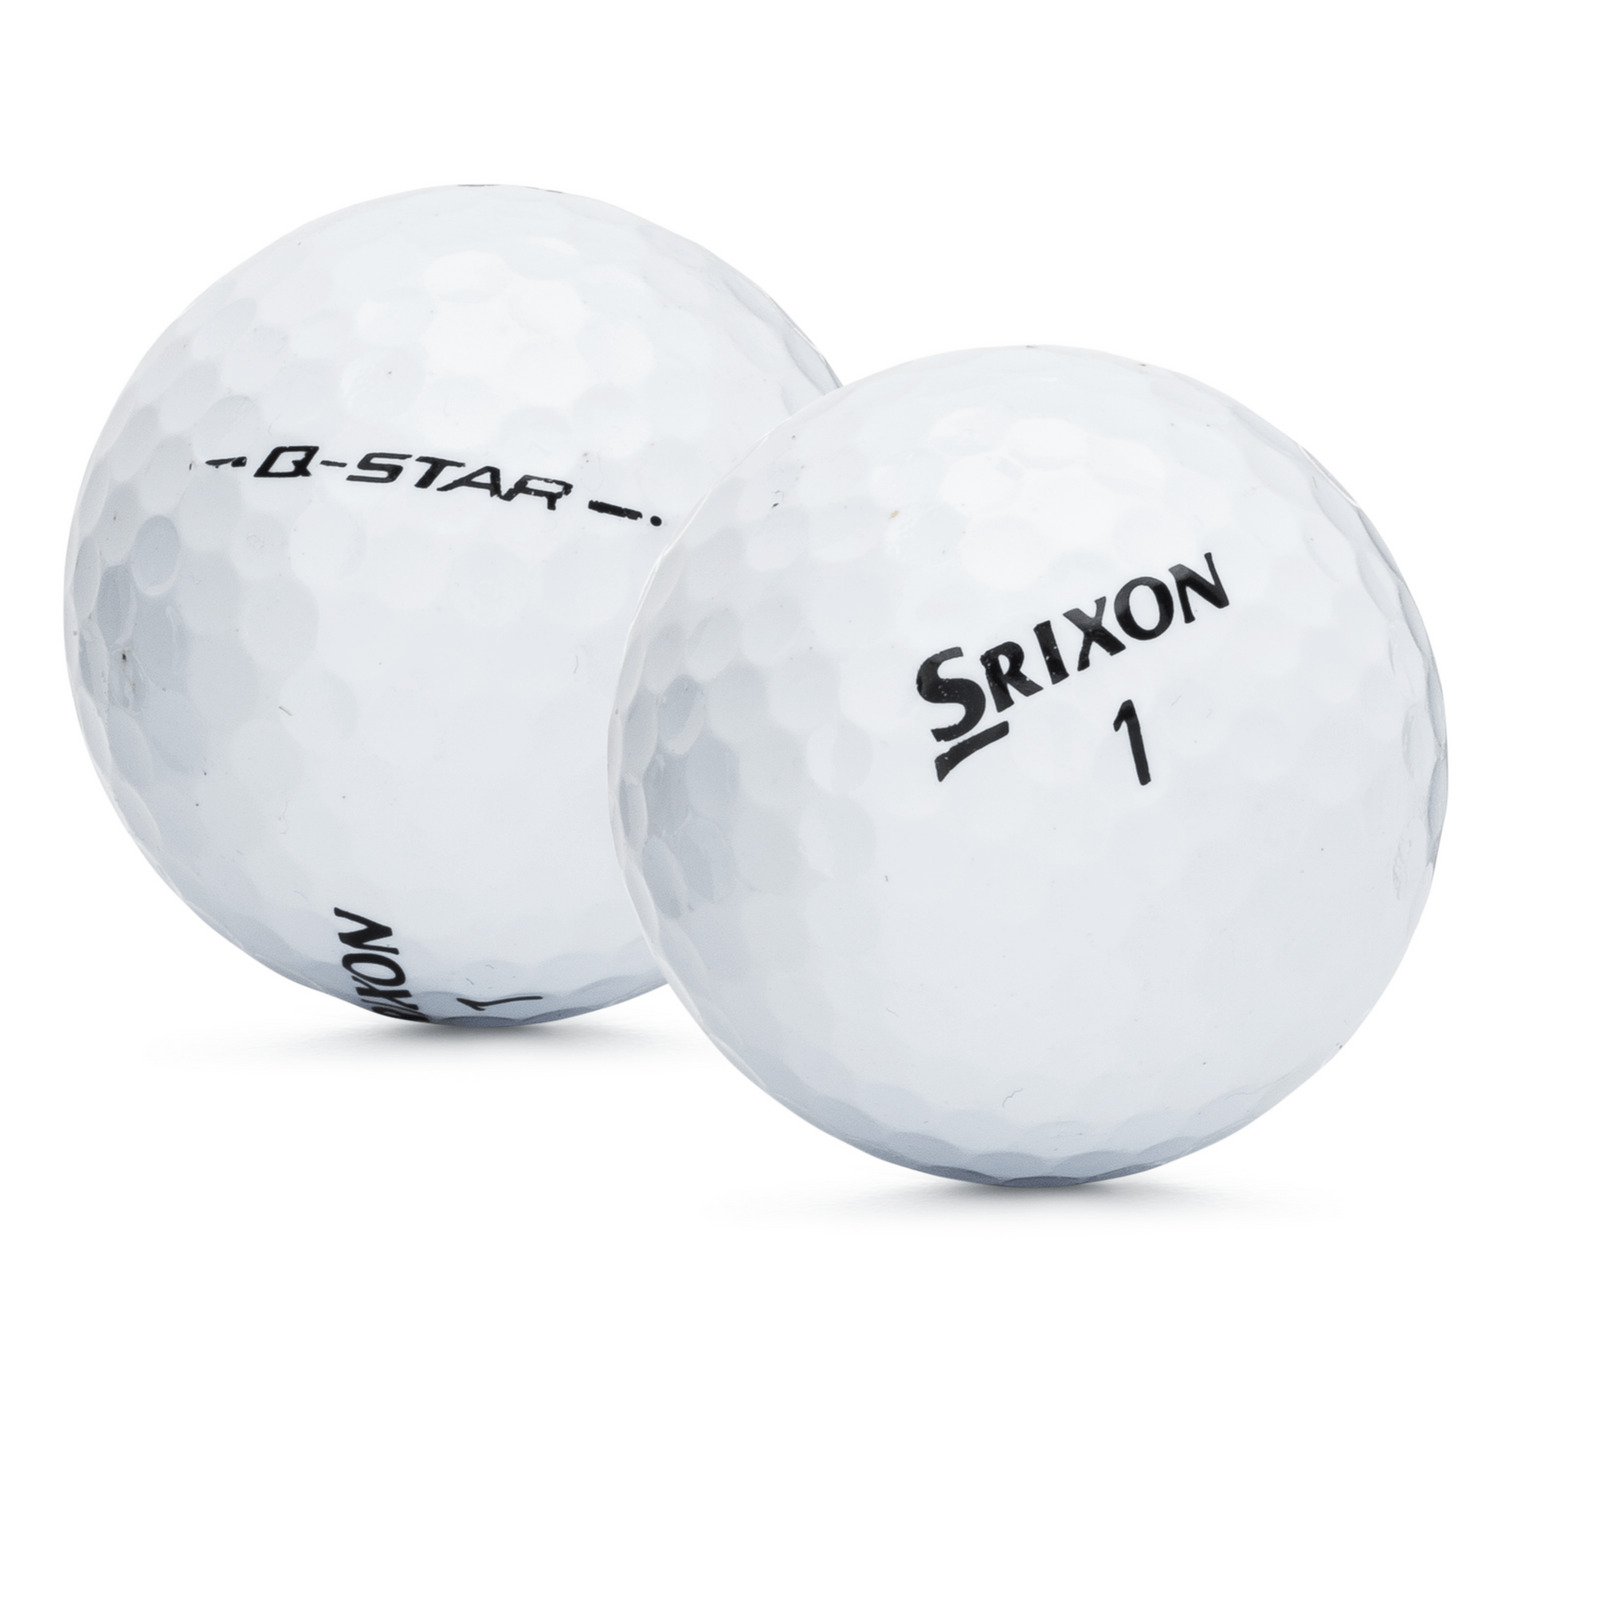 Srixon Q-Star Near Mint Recycled Used Golf Balls, White - 48 Count